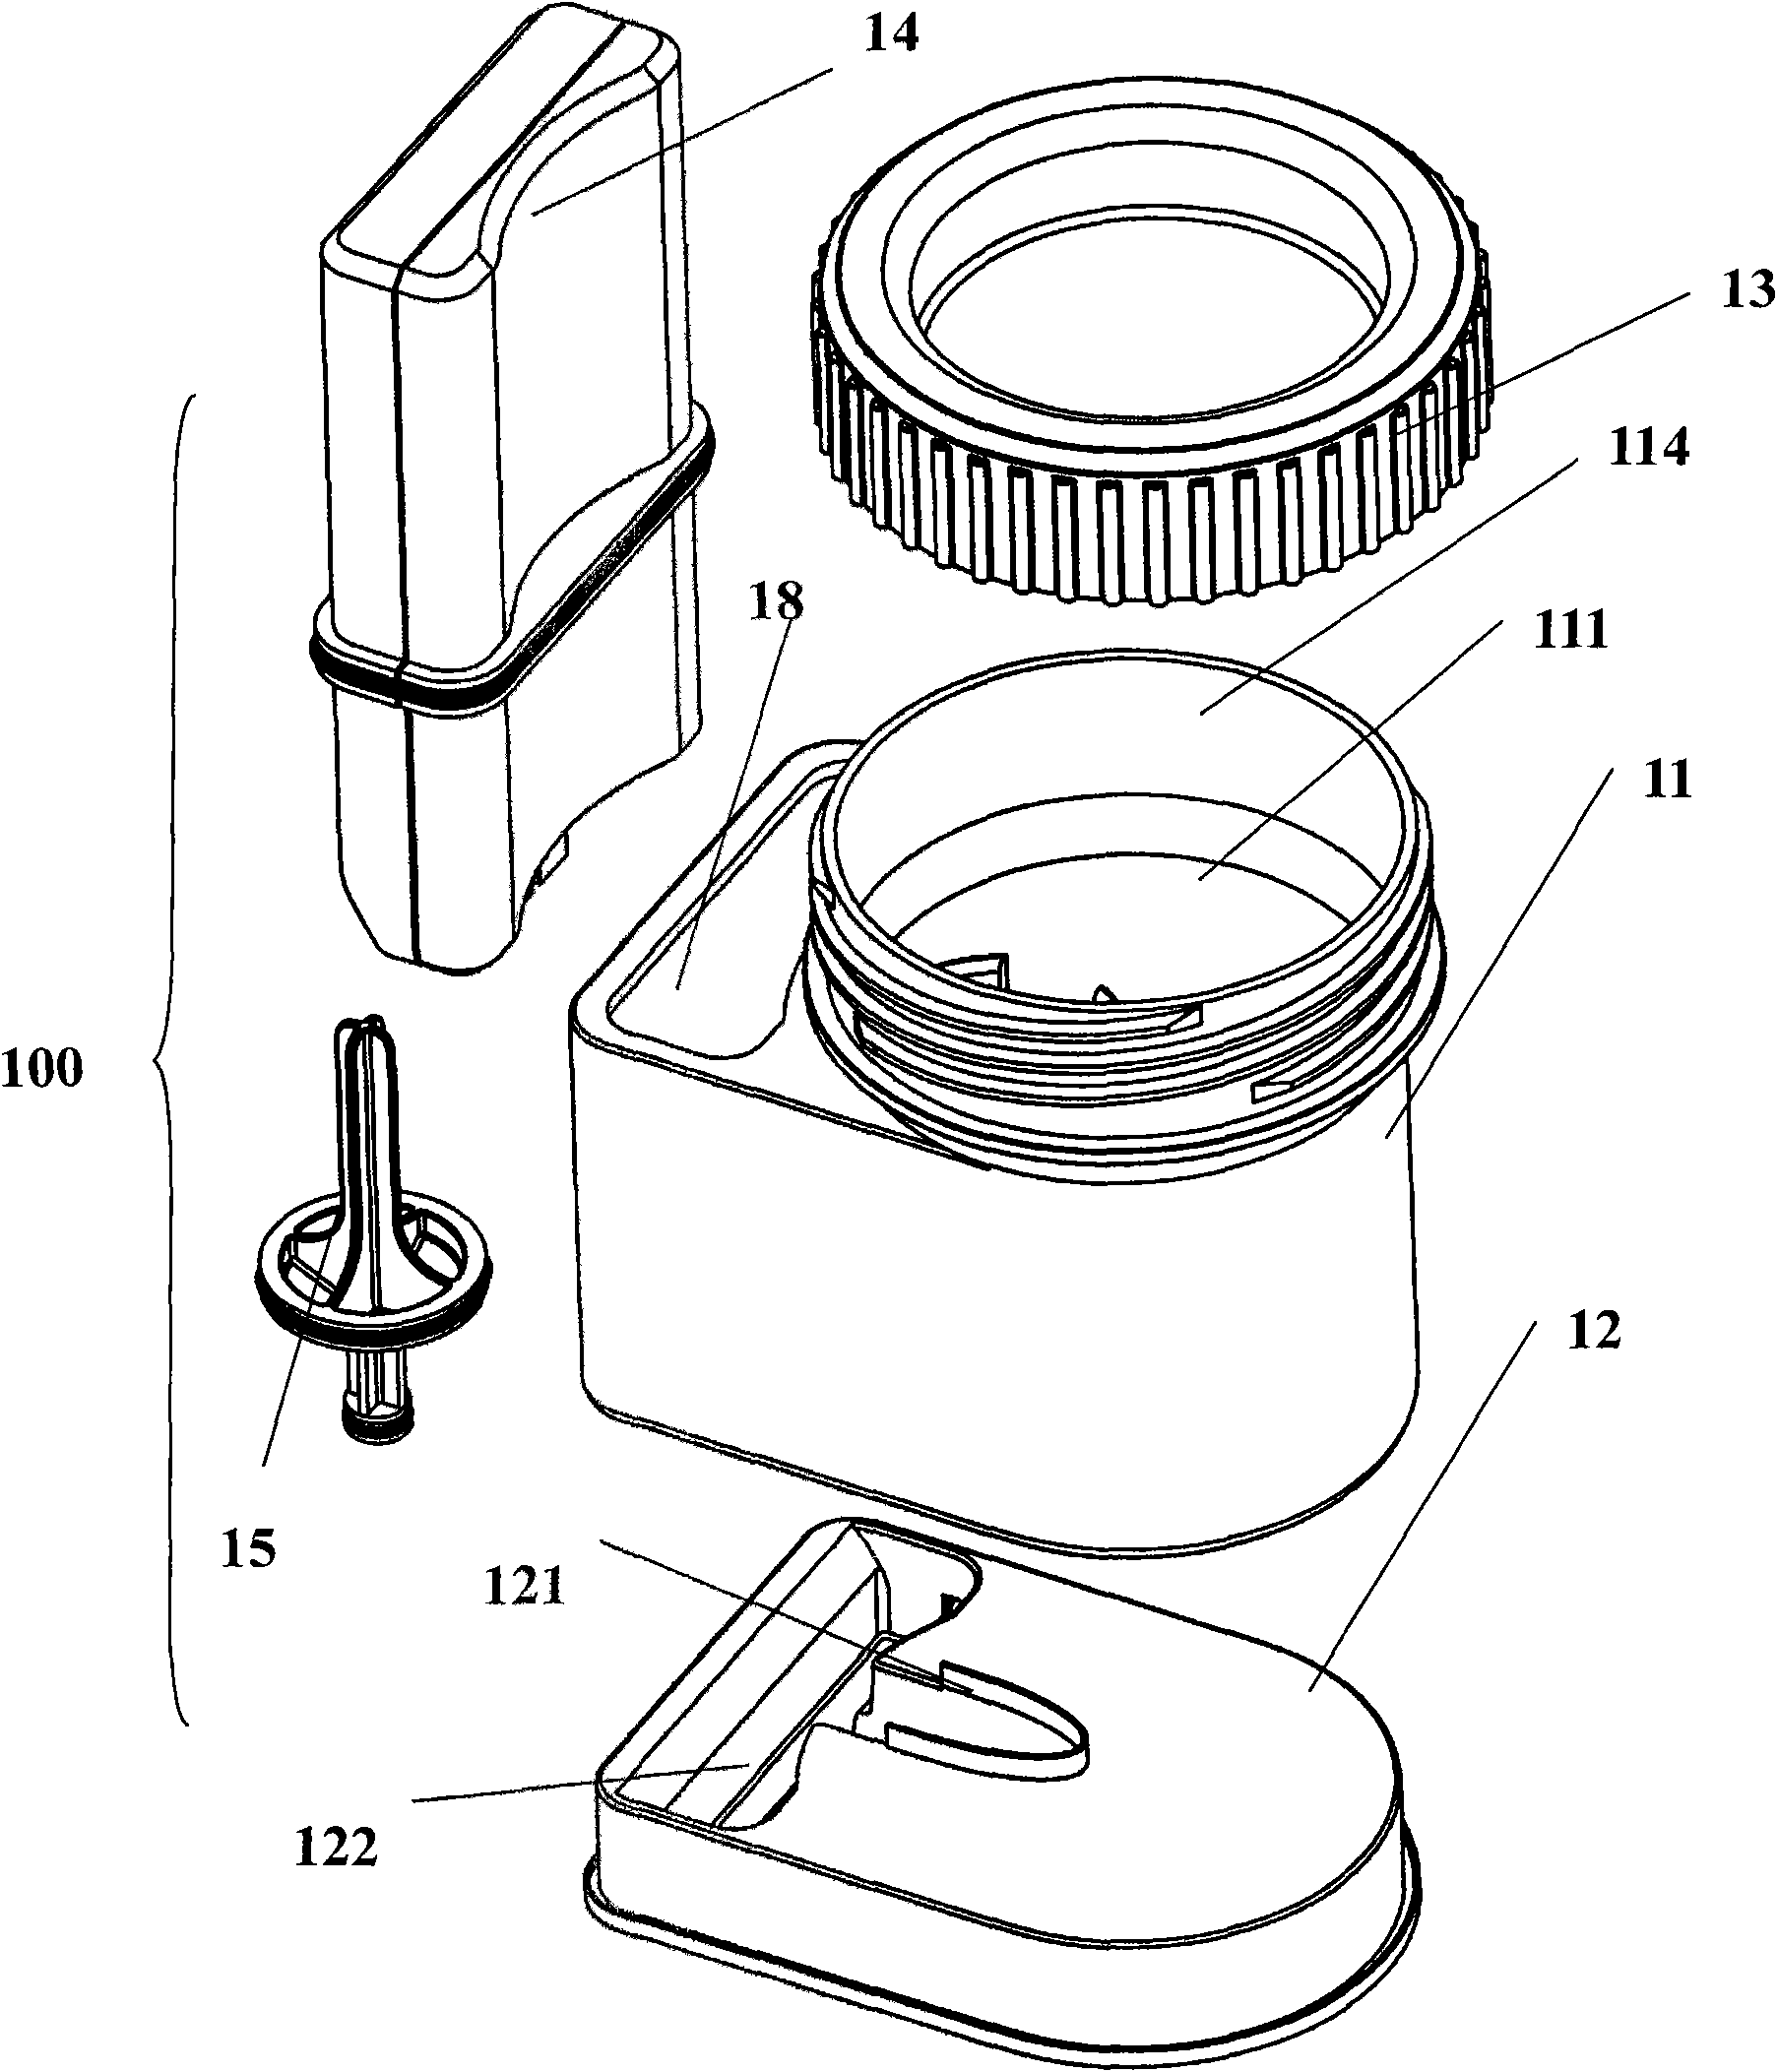 Device for analyzing analyte in liquid sample